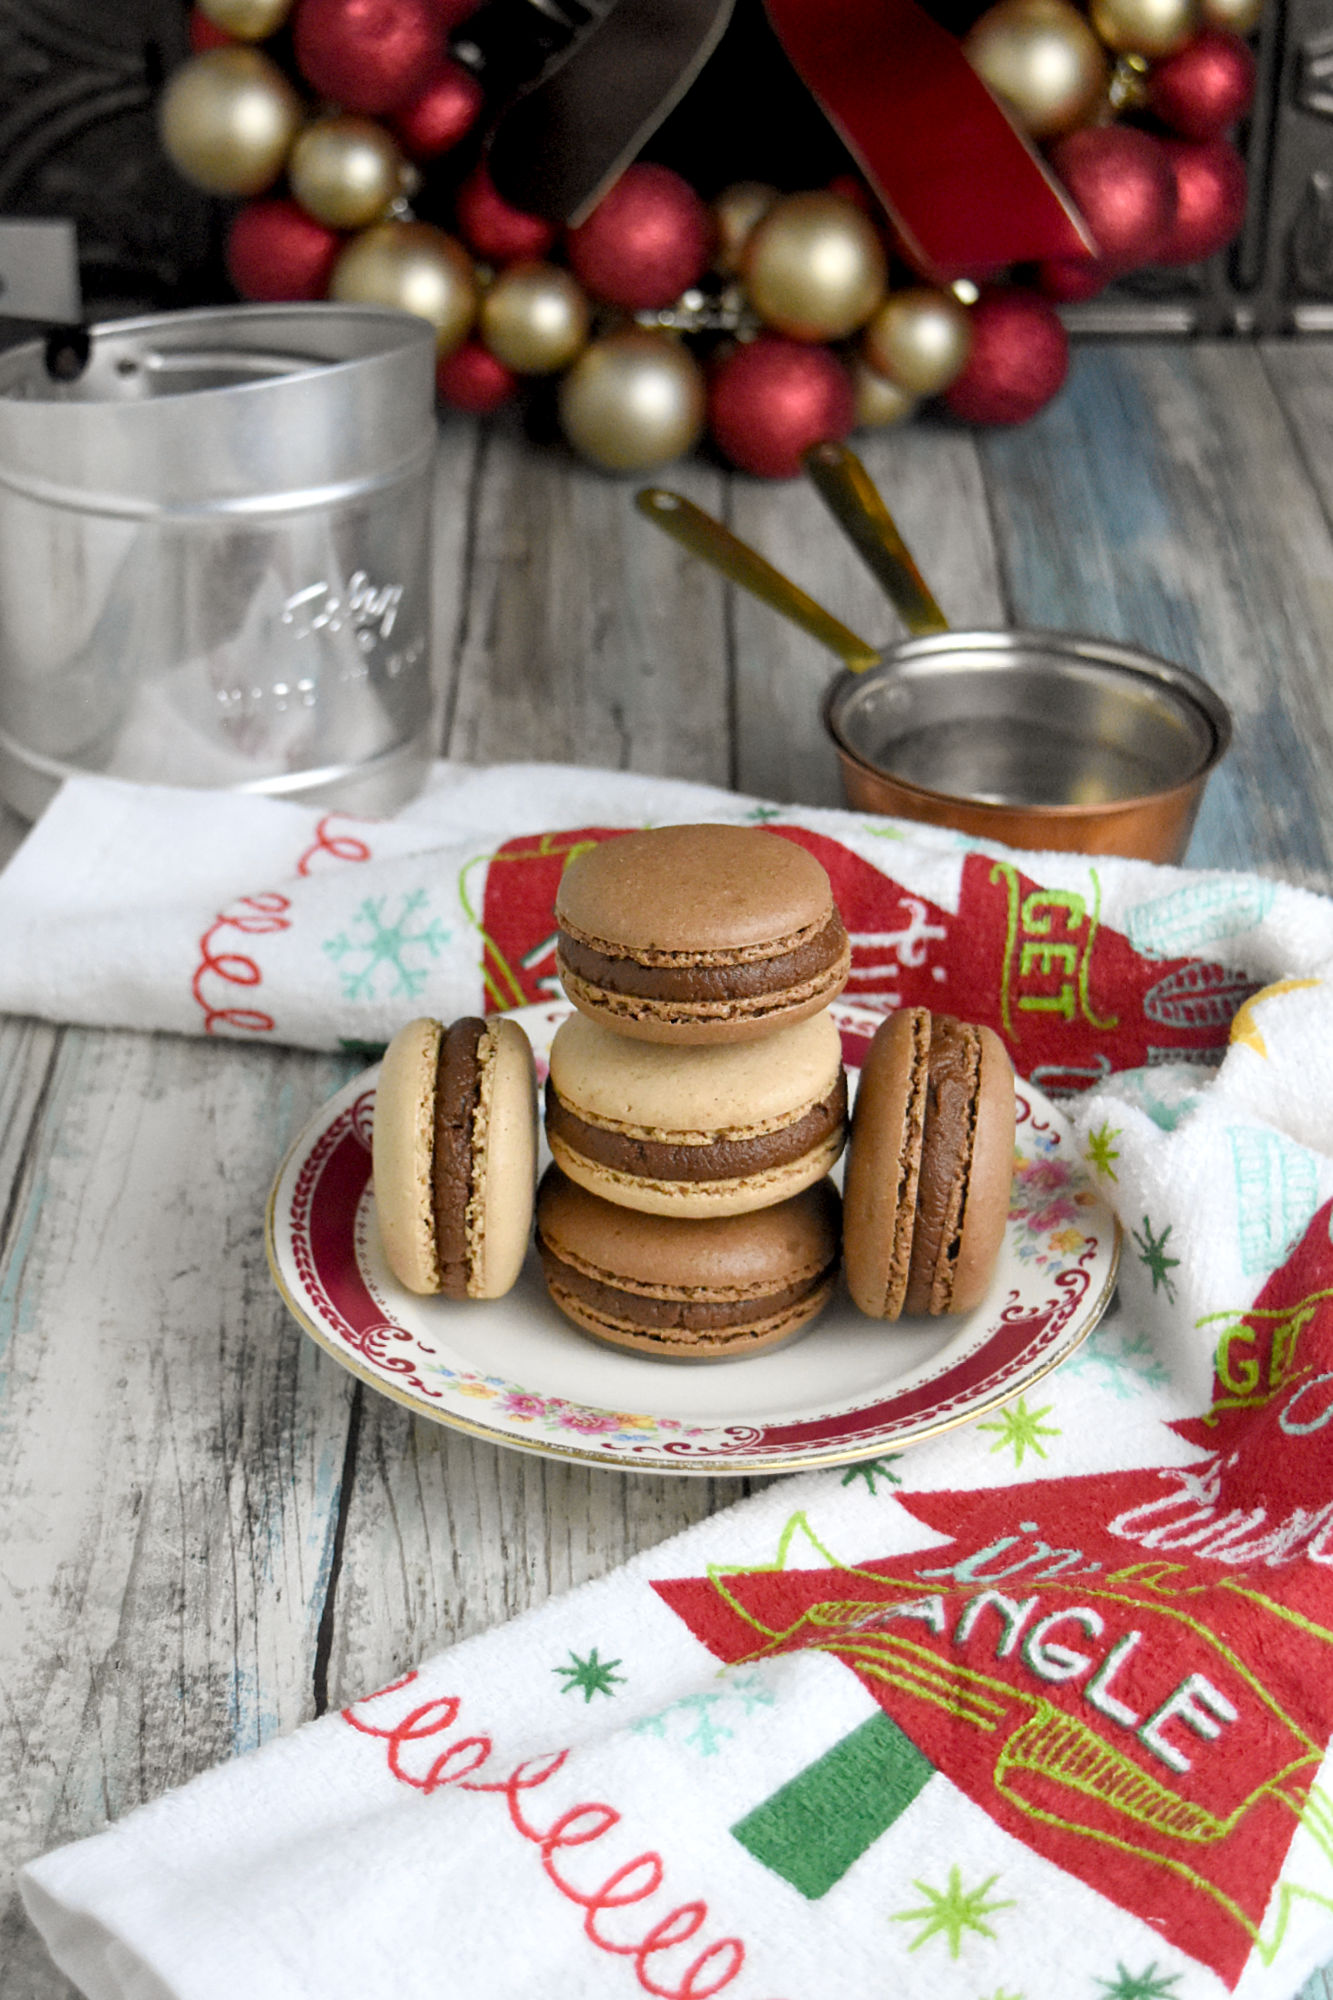 Reese’s Macaron have cocoa powder and peanut butter powder in the shells for delicious chocolate peanut butter flavor. And there’s peanut butter and cocoa powder in the filling, too. #ChristmasCookies #macaron #peanutbutter #chocolate #reesescups #Pbandchocolate